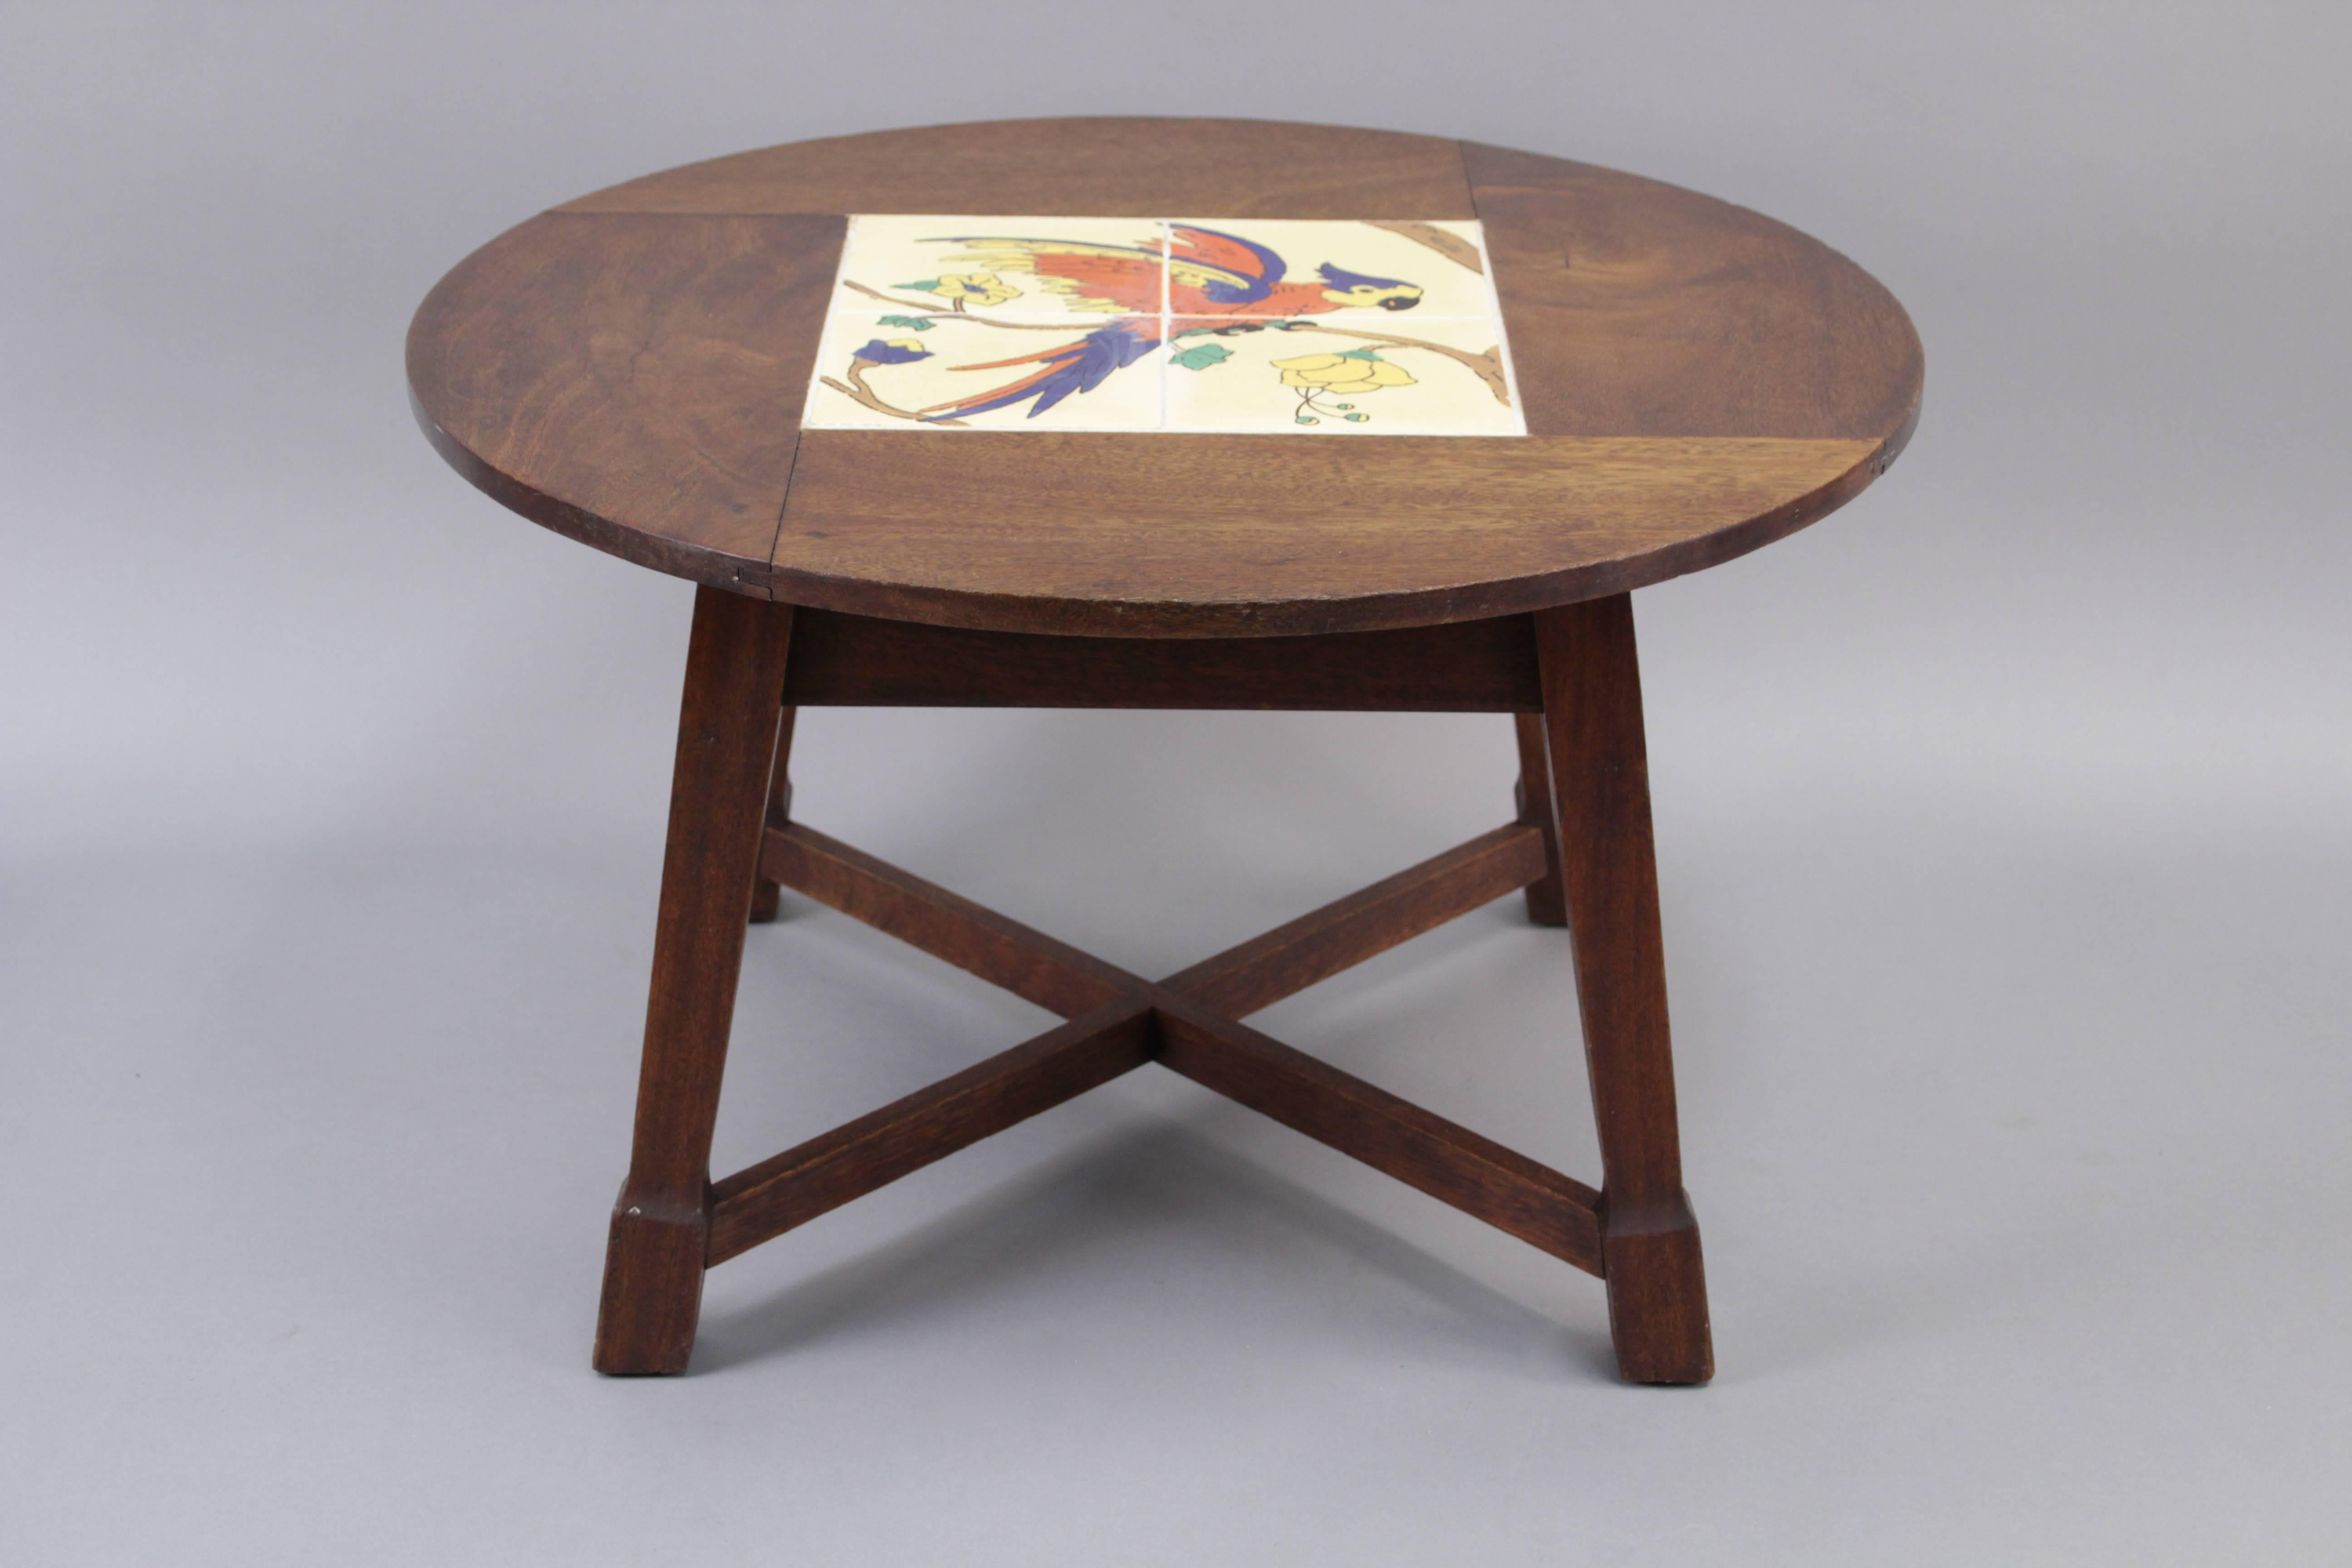 Tile table by the Taylor company with bird motif, circa 1920s.